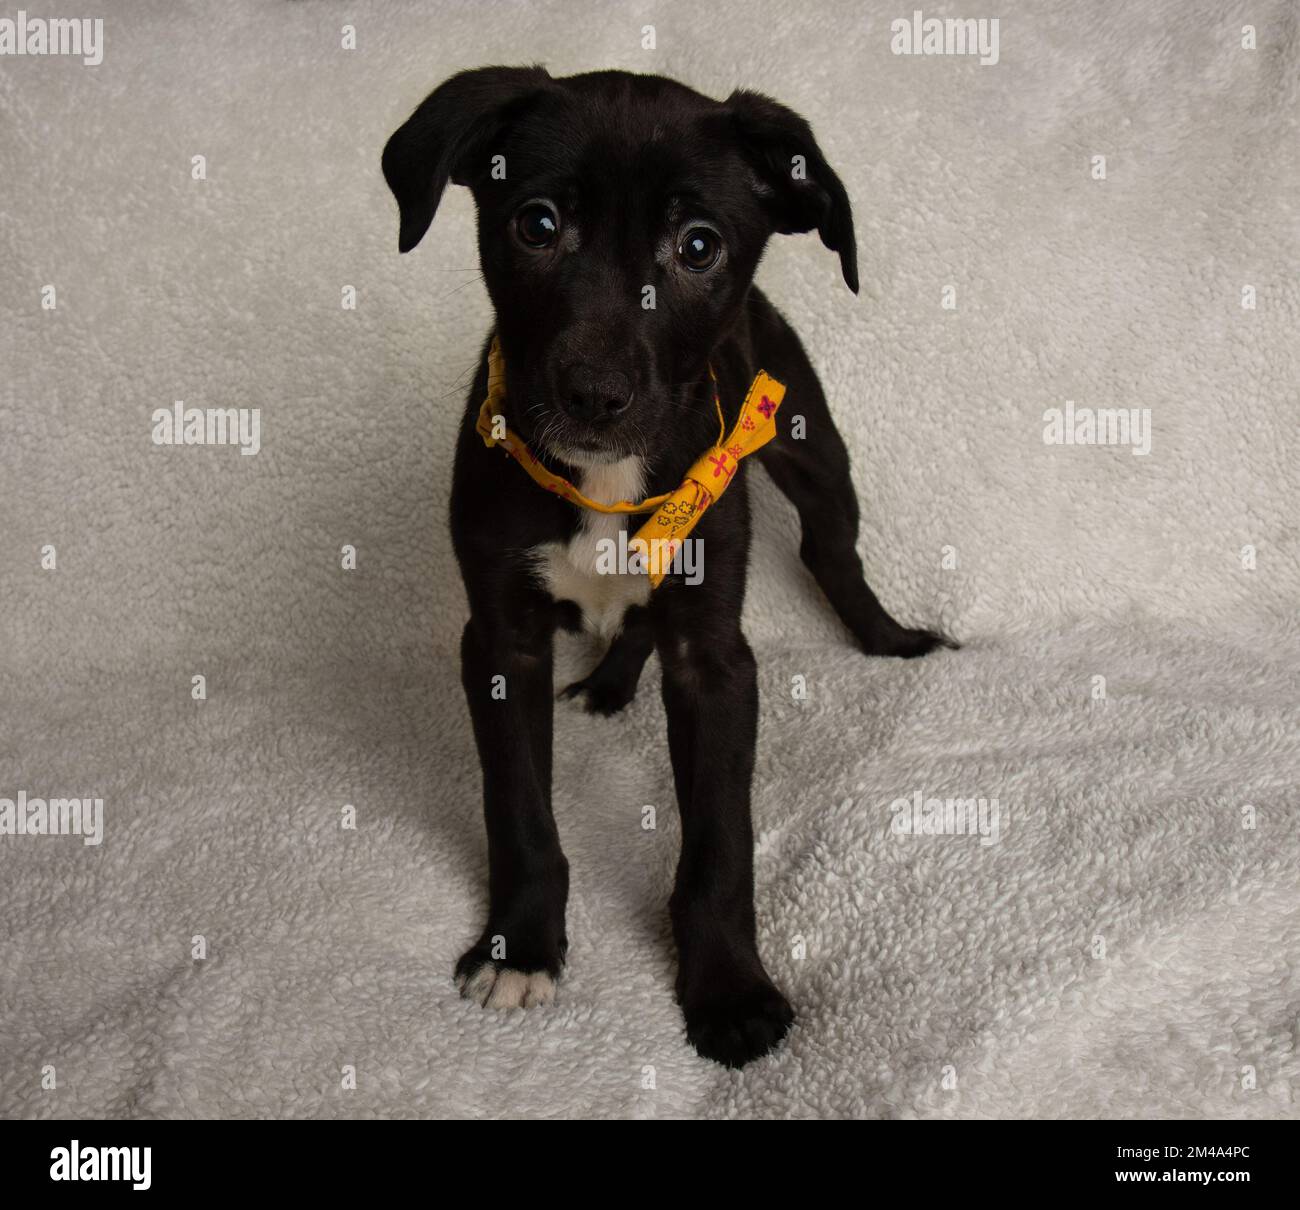 cute black and white young mastiff mix puppy standing looking at camera Stock Photo